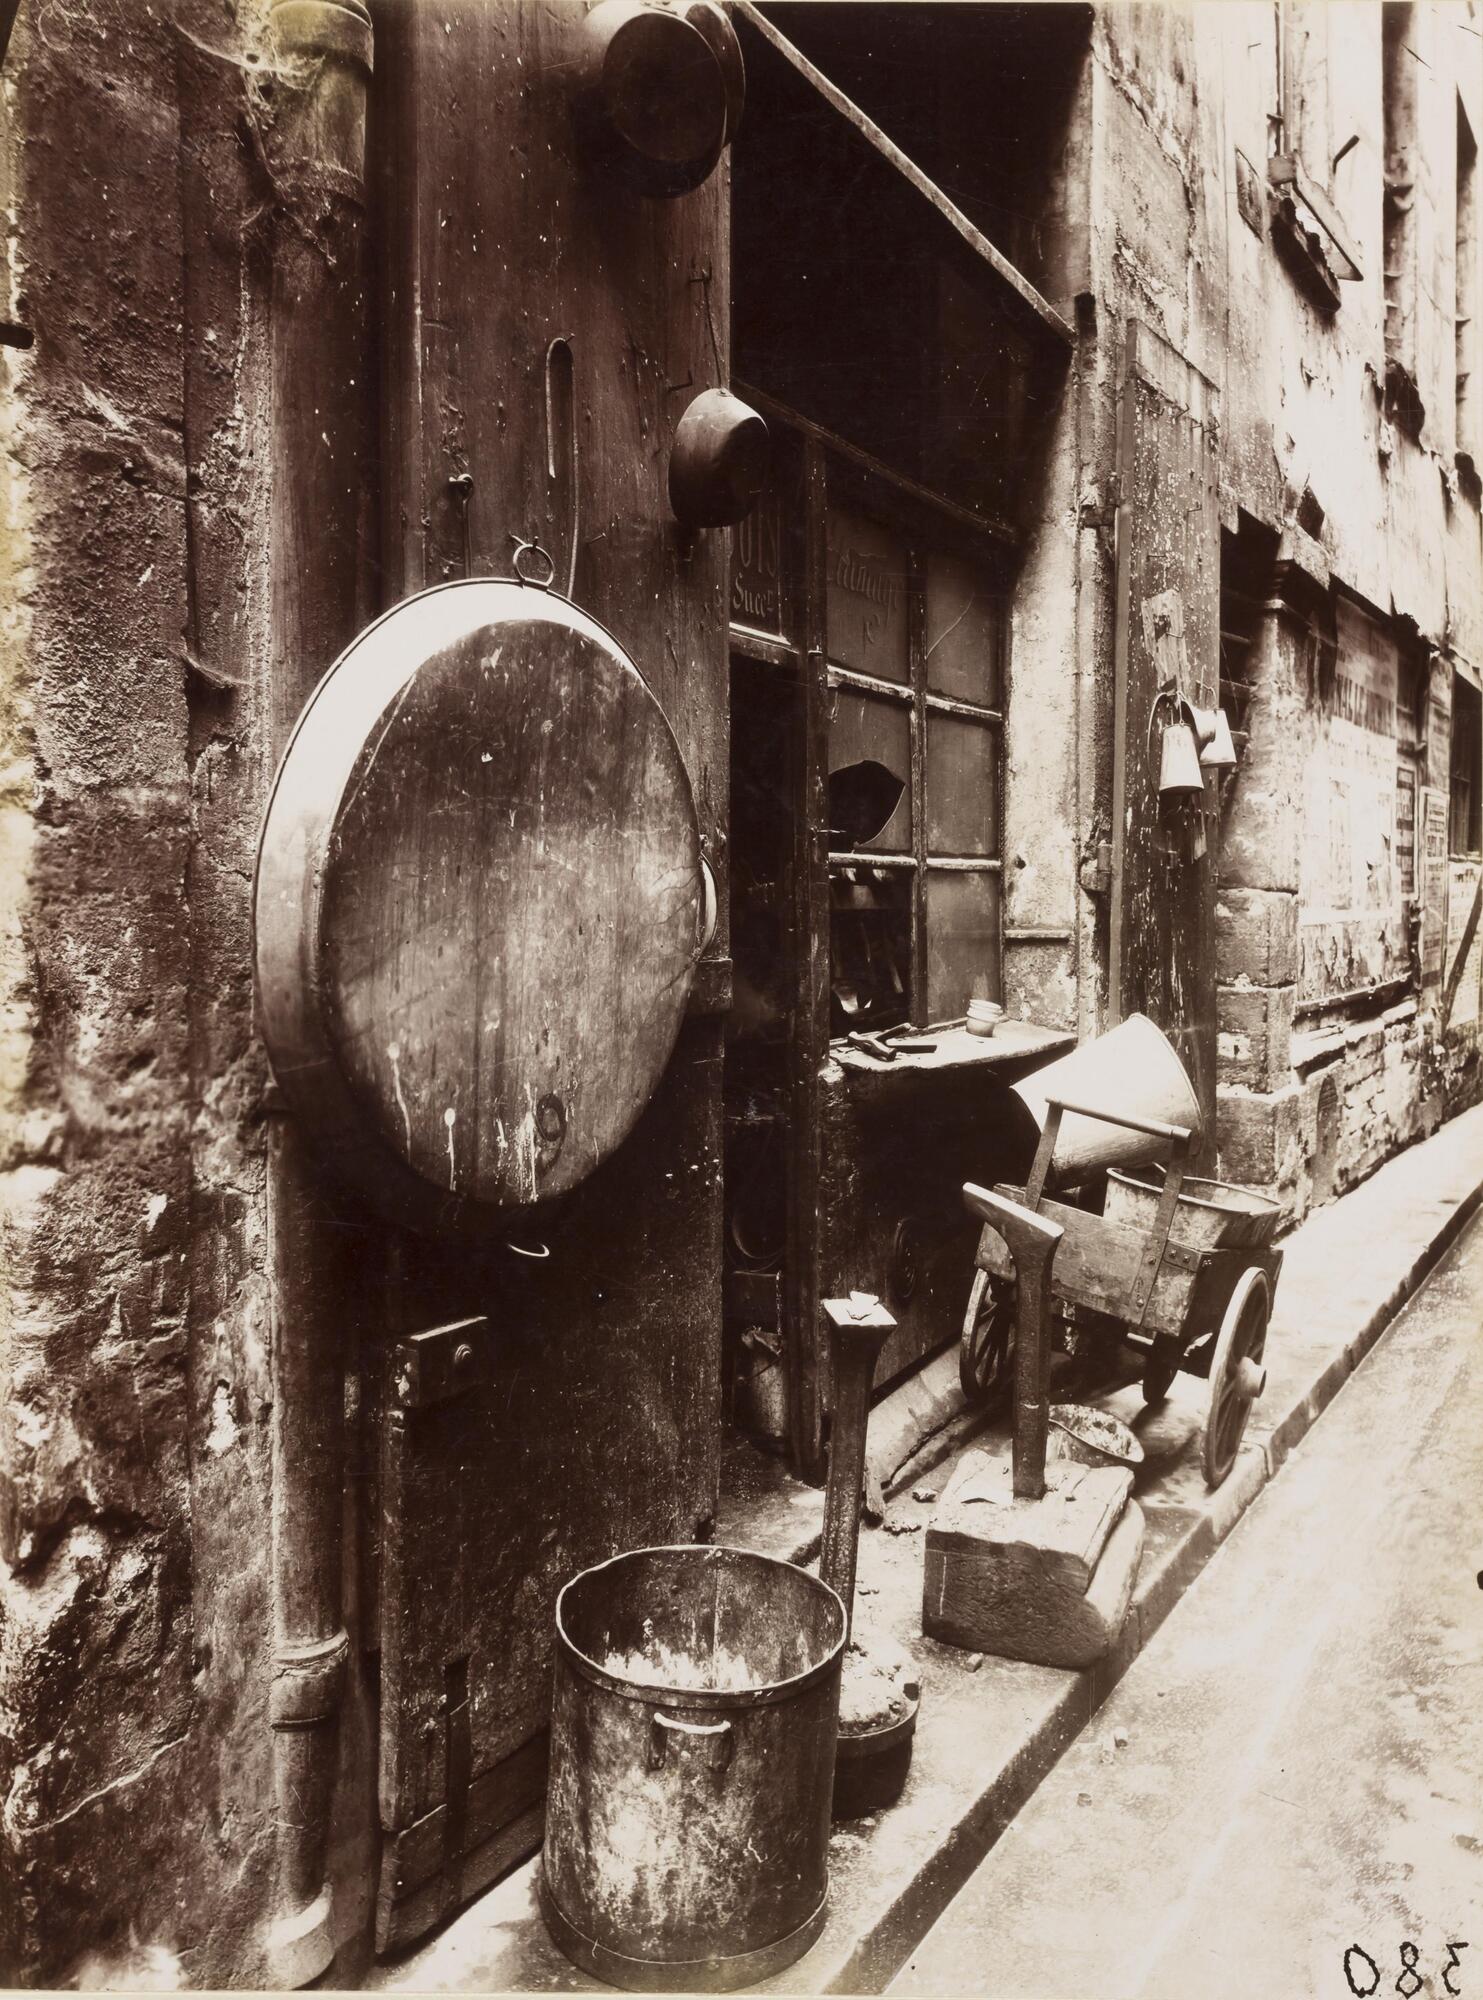 View of the exterior of a tinsmith's shop in a Parisian passageway.